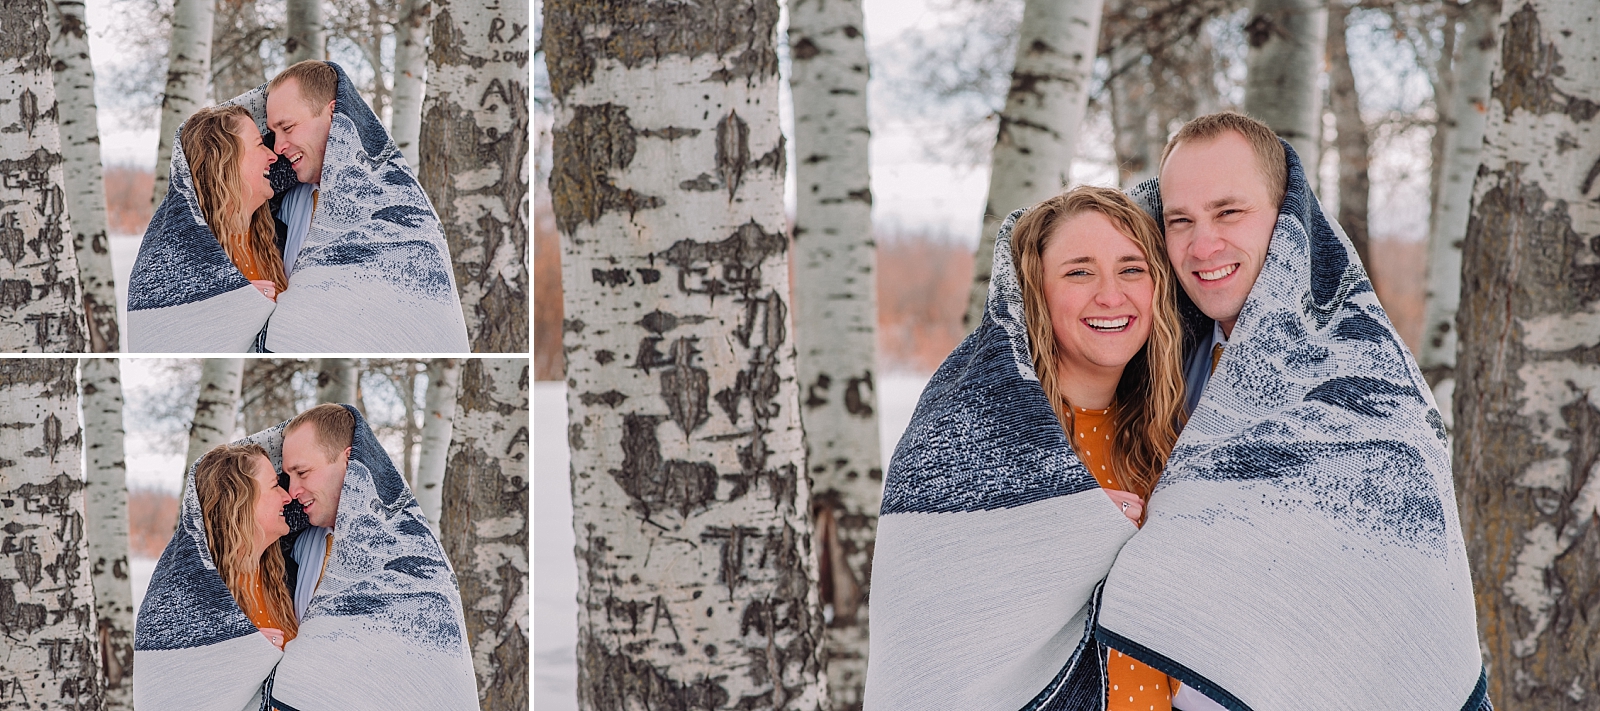 funny engagement photos winter couple pictures idaho falls engagement photographer playful couple poses